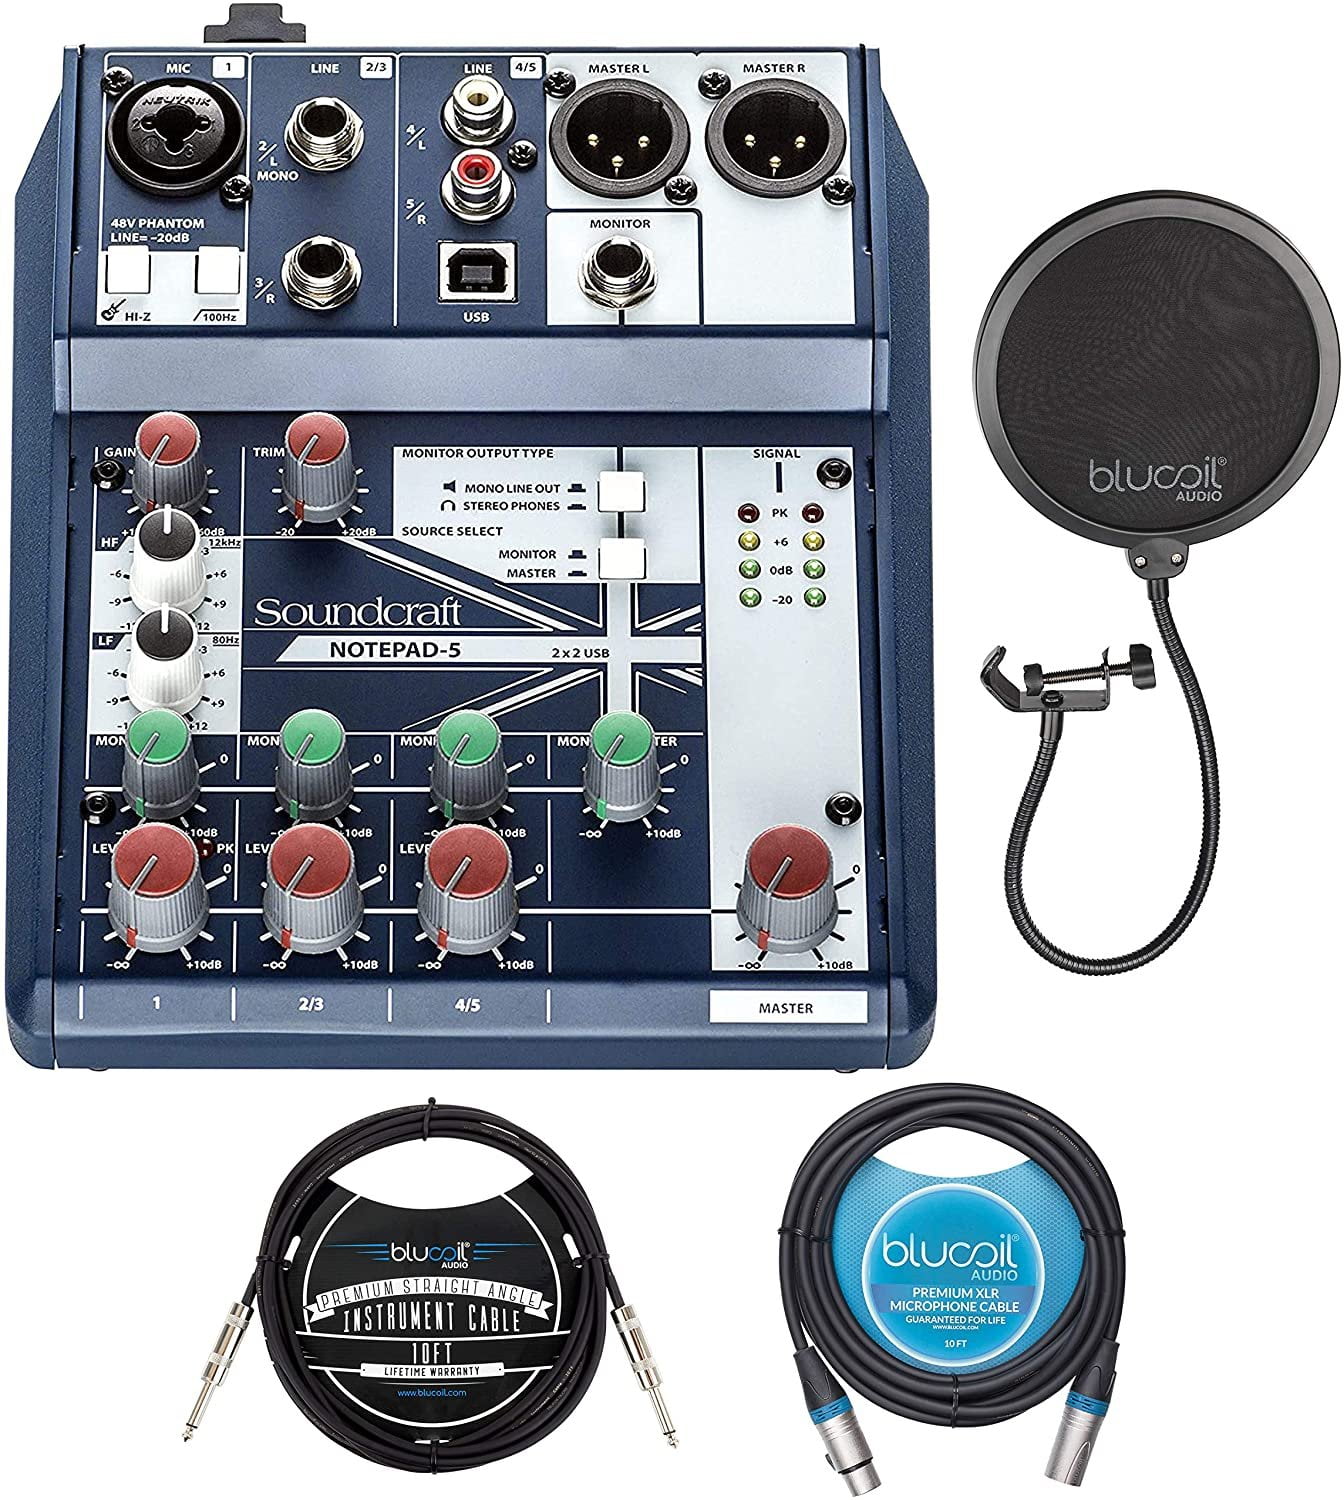 Soundcraft　with　Instrument　Mixing　Notepad-5　Console　Straight　Analog　Cable　Blucoil　XLR　Filter,　Pop　Cable